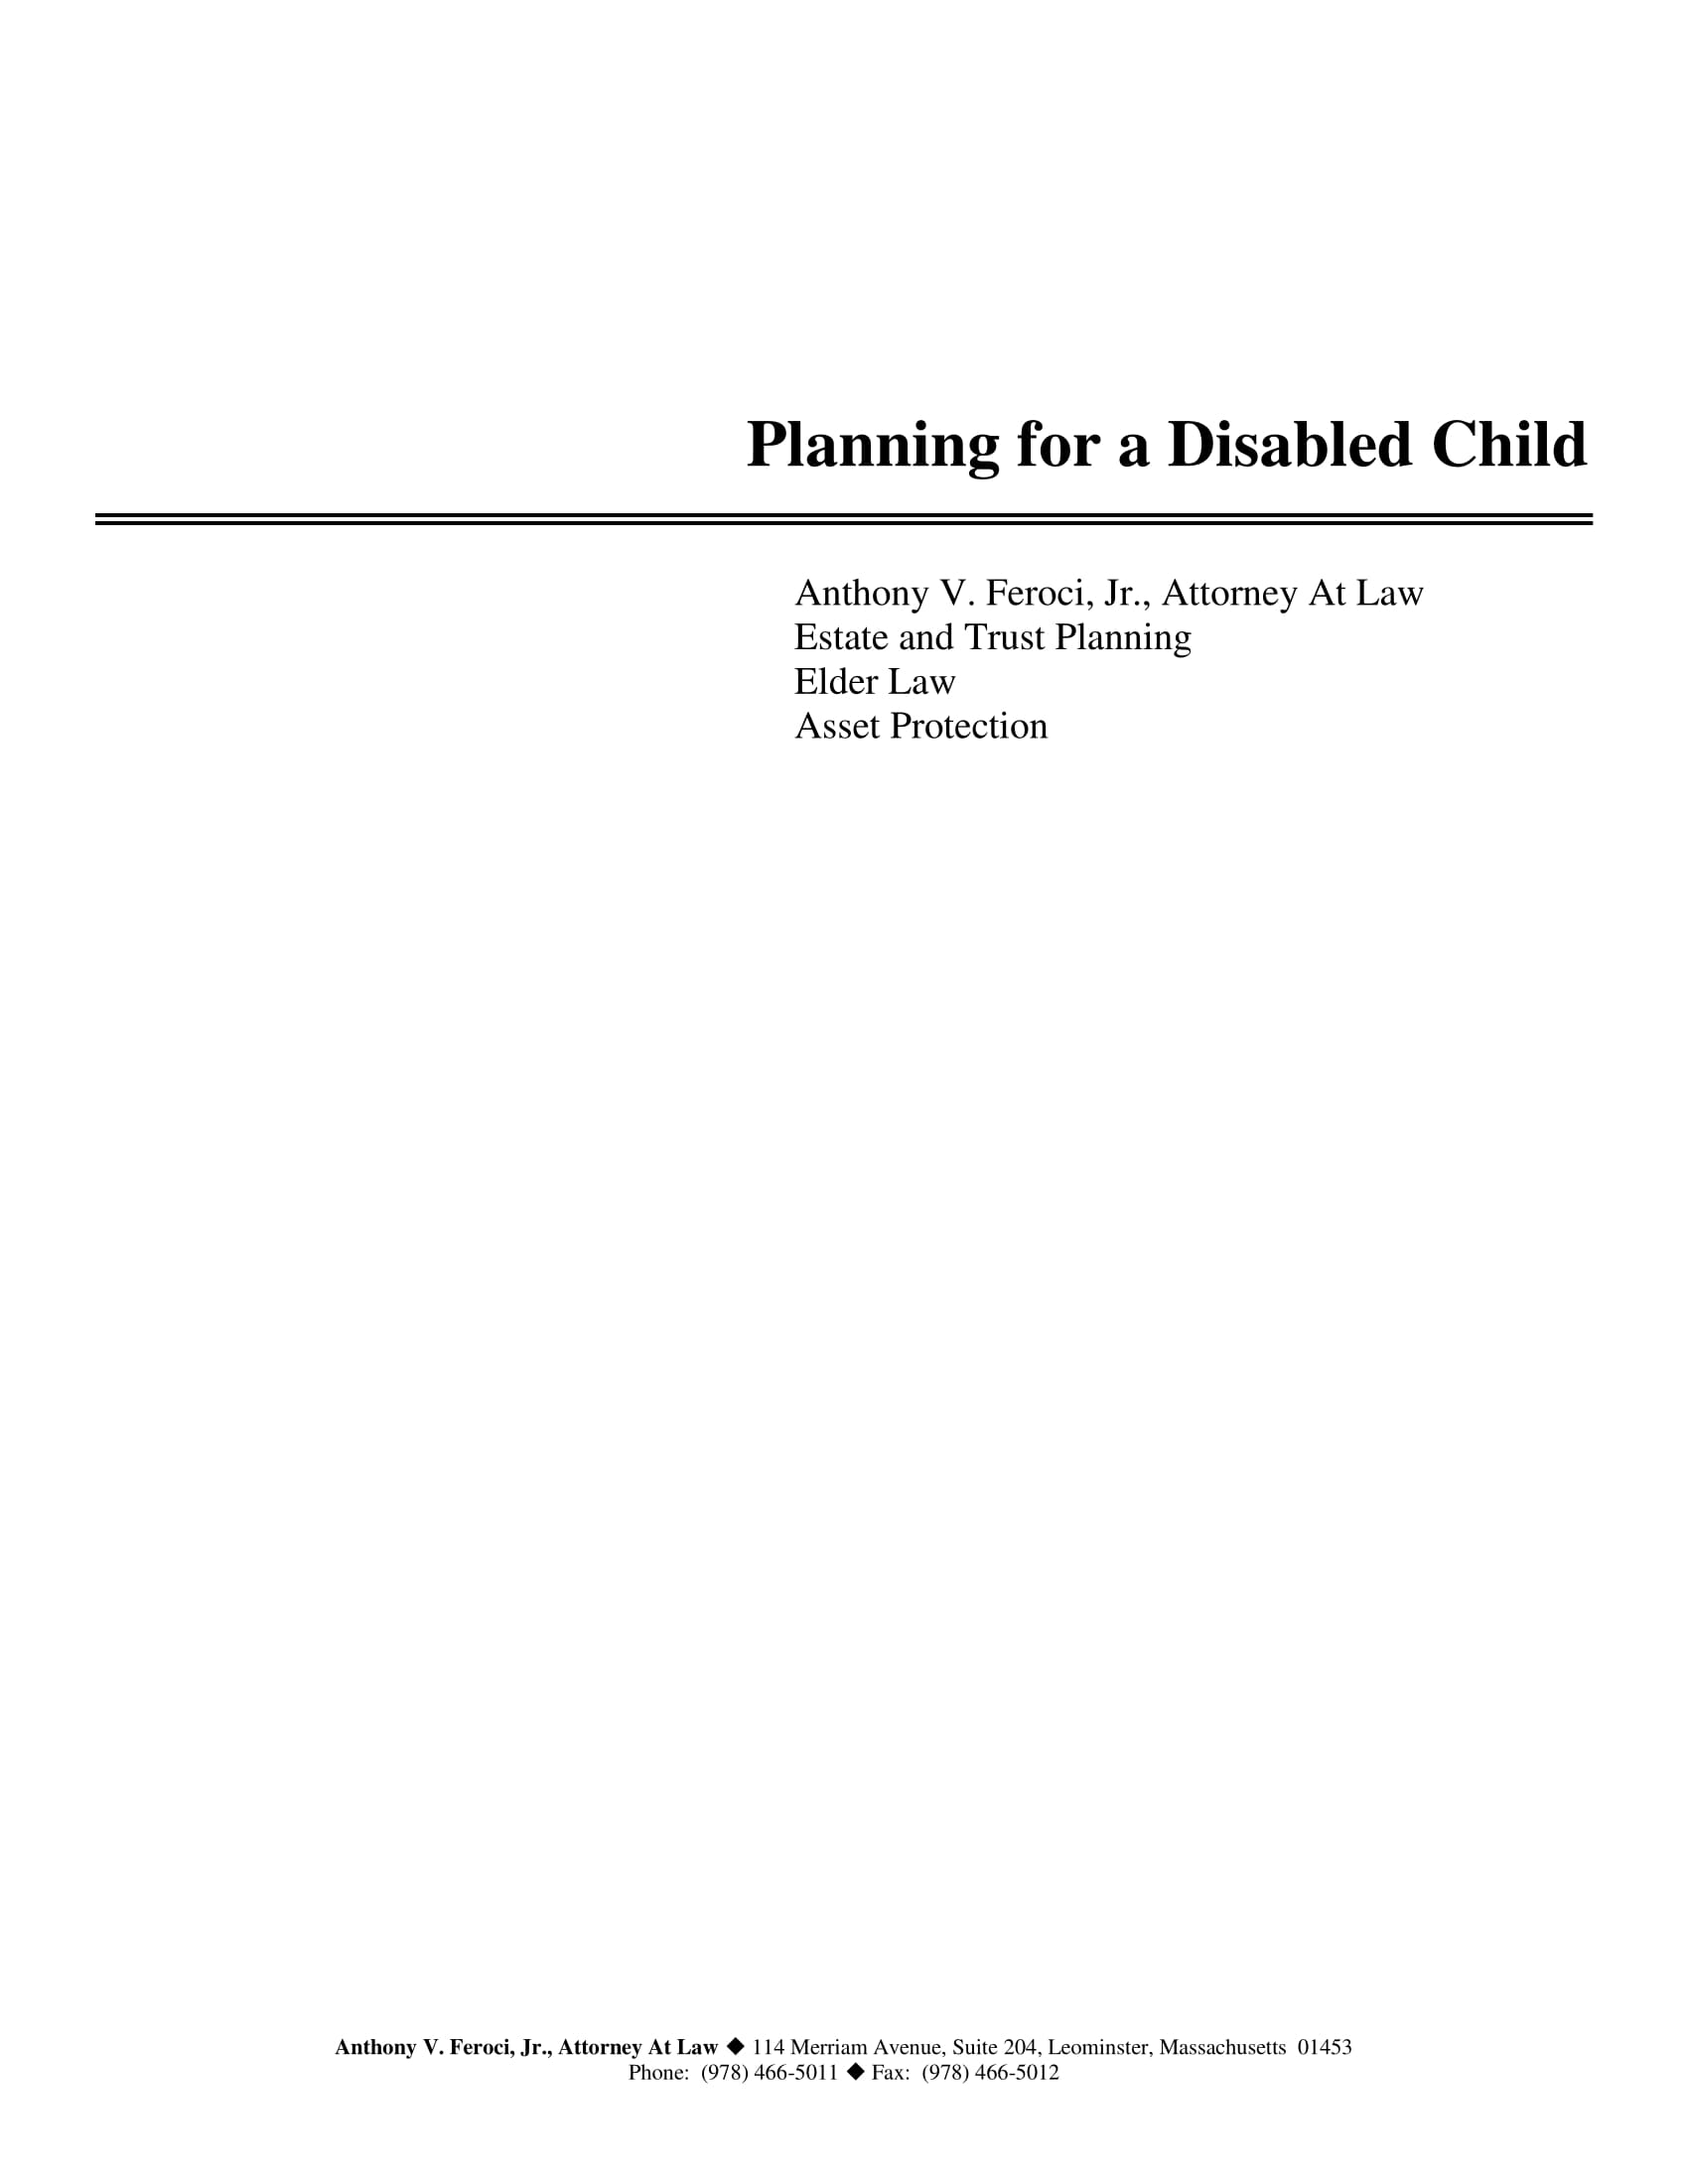 Planning-for-a-Disabled-Child